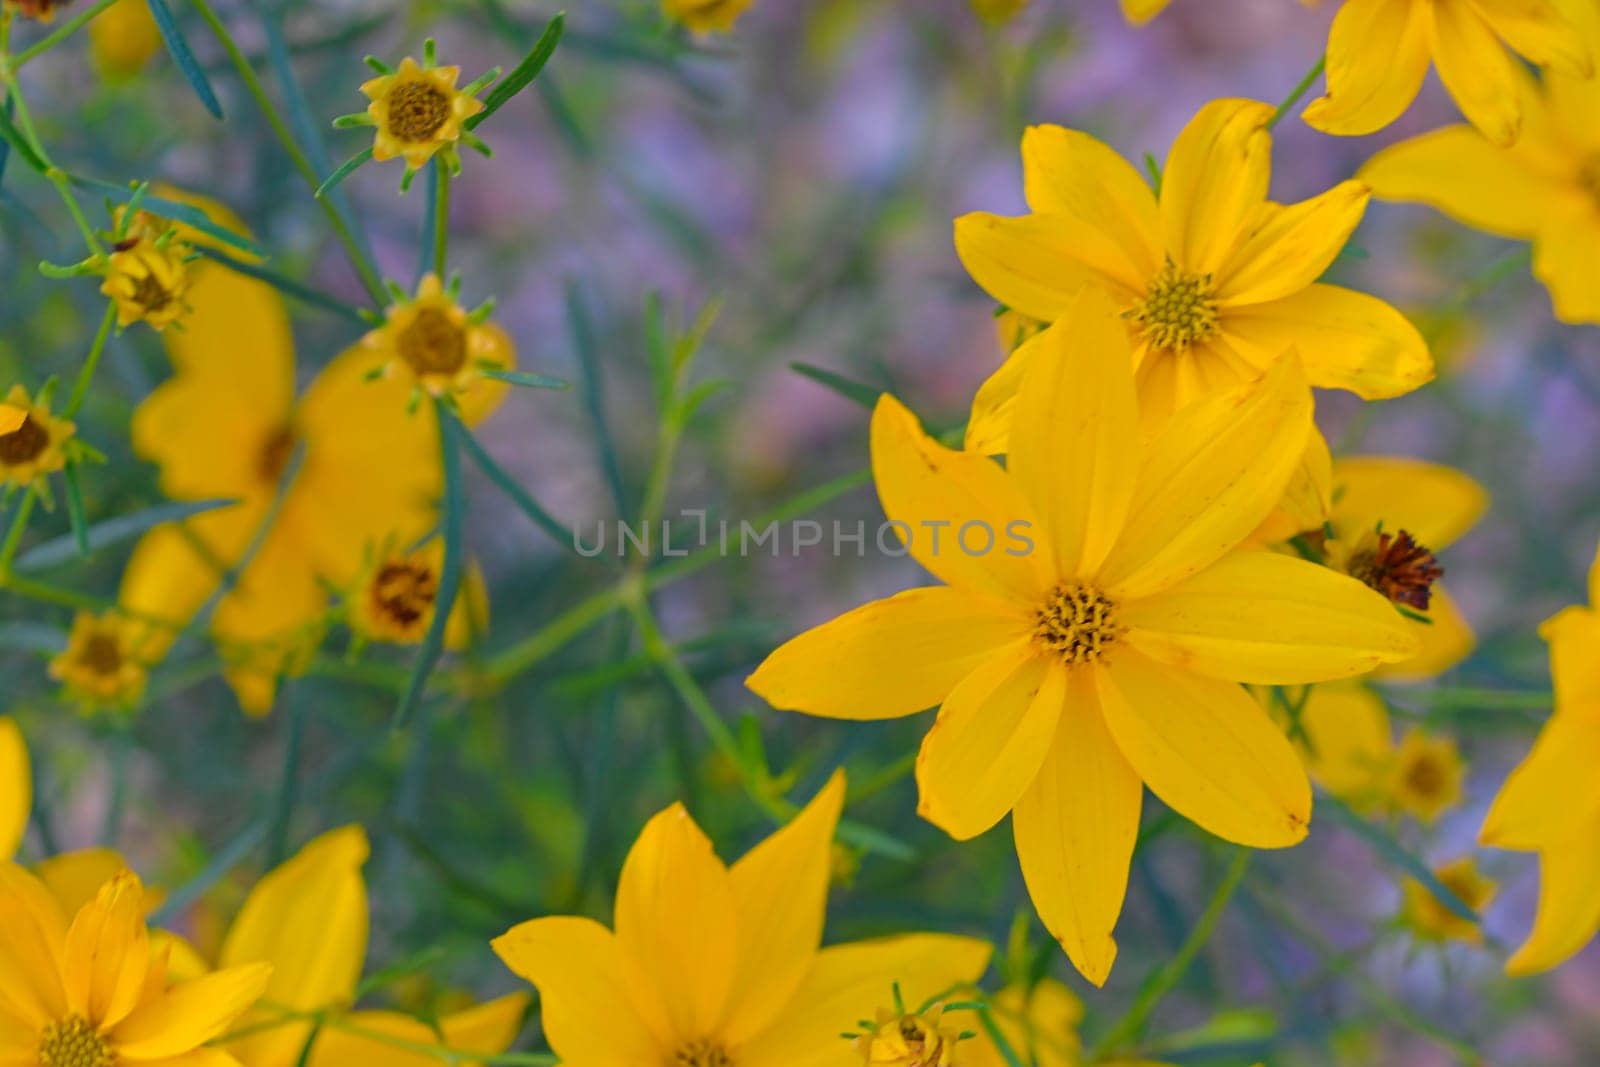 Coreopsis is a genus of flowering plants in the family Asteraceae. Common names include calliopsis and tickseed. There are 75 80 species of Coreopsis, all of which are native to North, Central, and South America. The name Coreopsis is derived from the Ancient Greek.